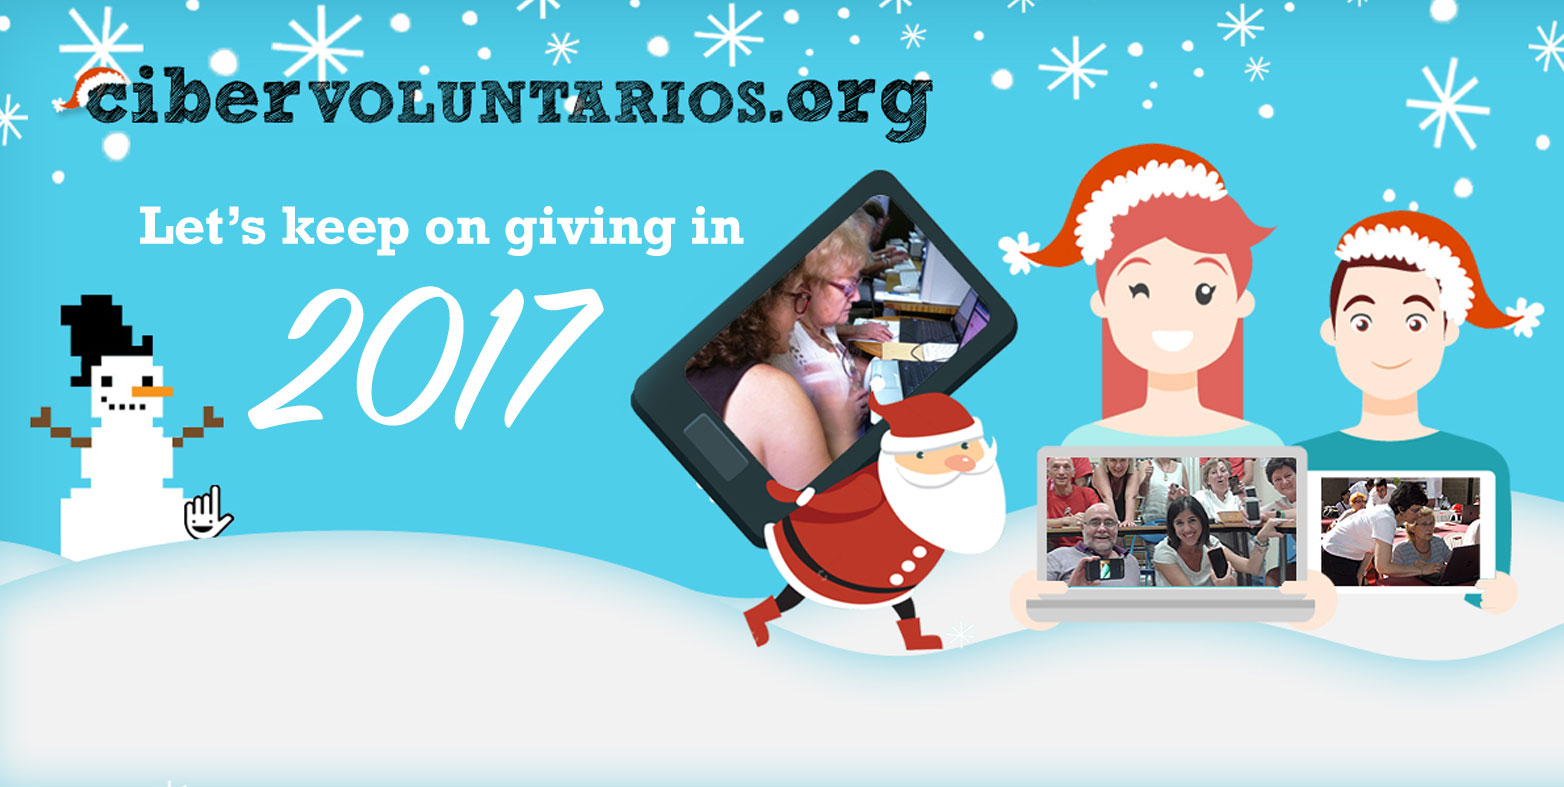 The team of Cibervoluntarios wishes you Merry Xmas! look what we’ve achieved together in 2016